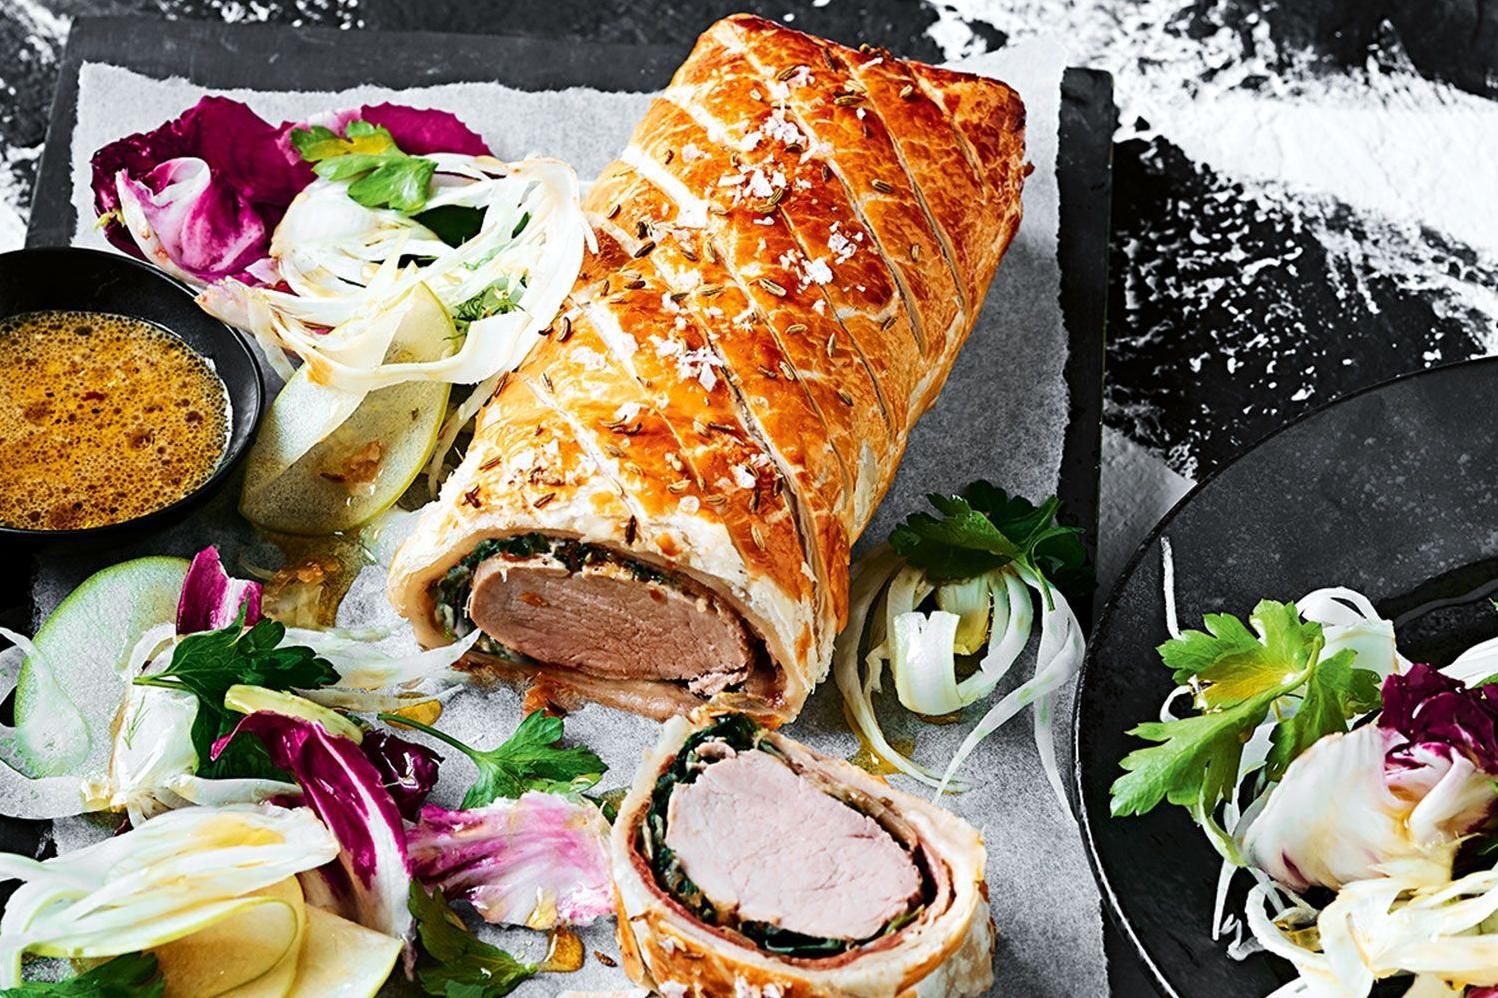  There's nothing quite like the satisfying crunch of biting into the buttery, flaky pastry of a pork Wellington.